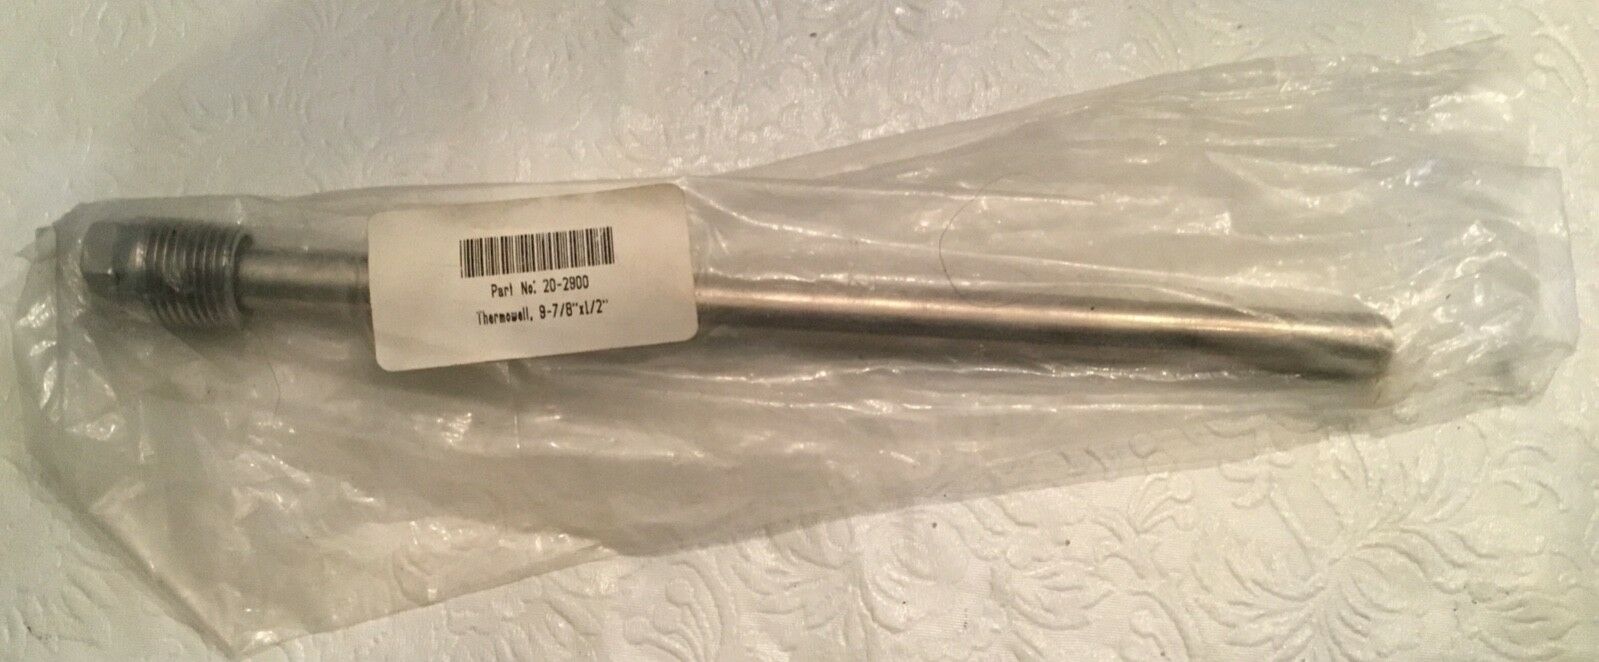 STAINLESS STEEL THERMOWELL, 1/2 INCH BULB, 9 7/8 INCH LONG Spa Jacuzzi